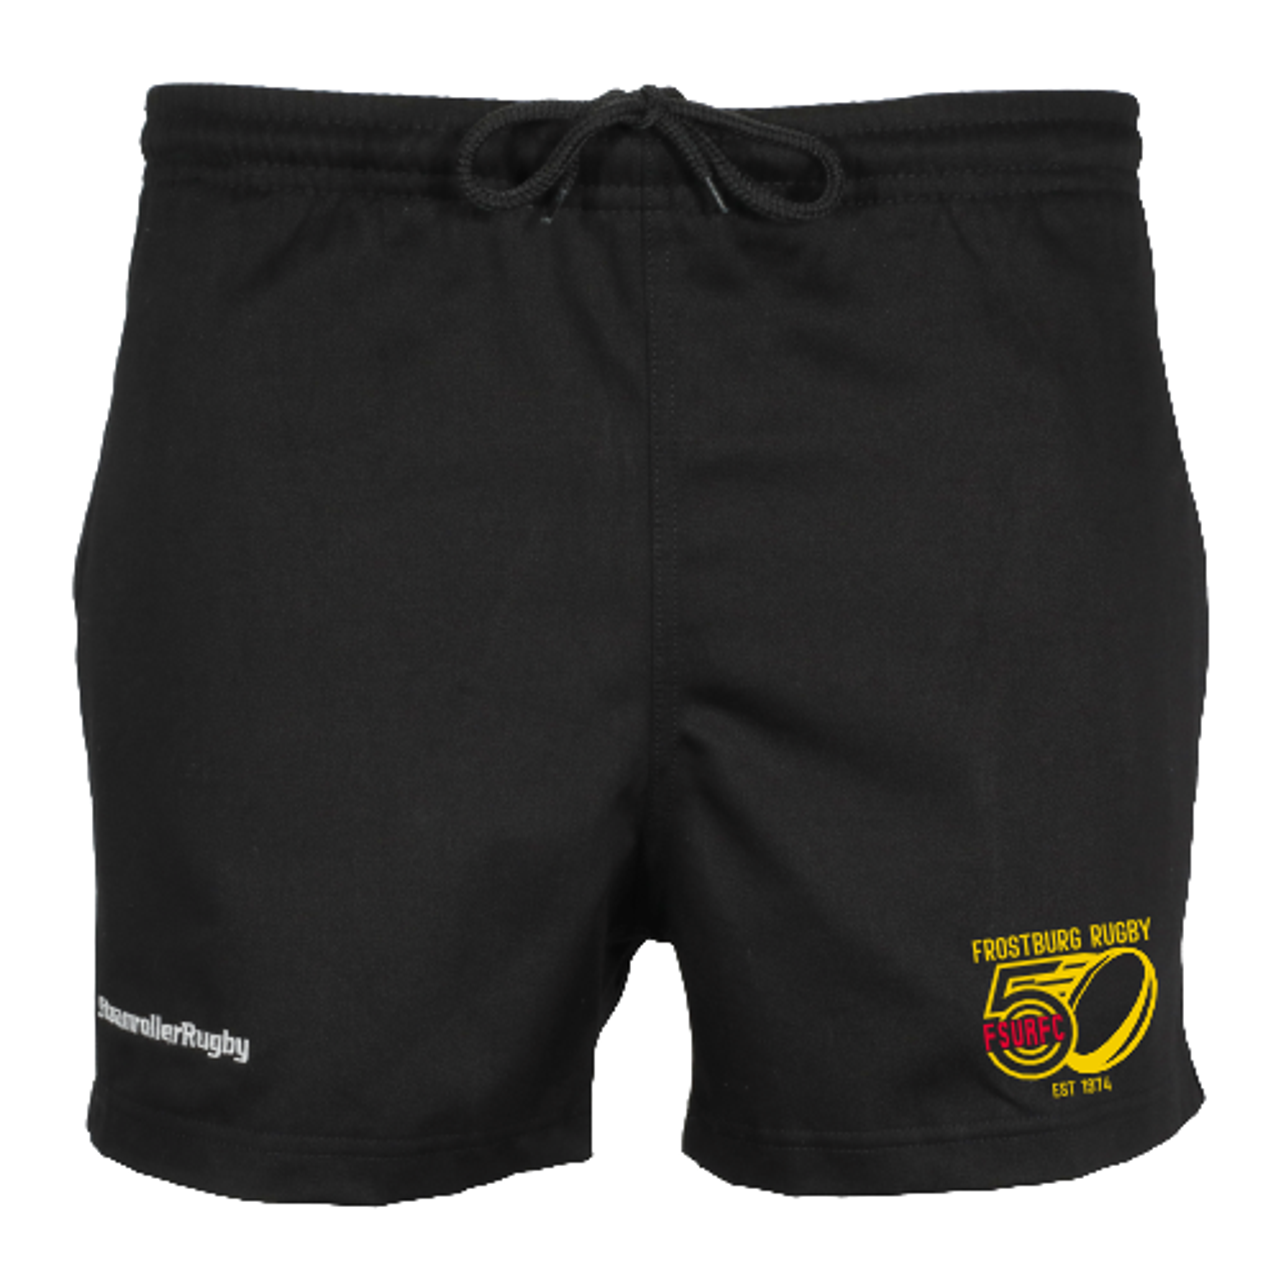 Frostburg 50th Anniversary SRS Cotton Pocketed Shorts